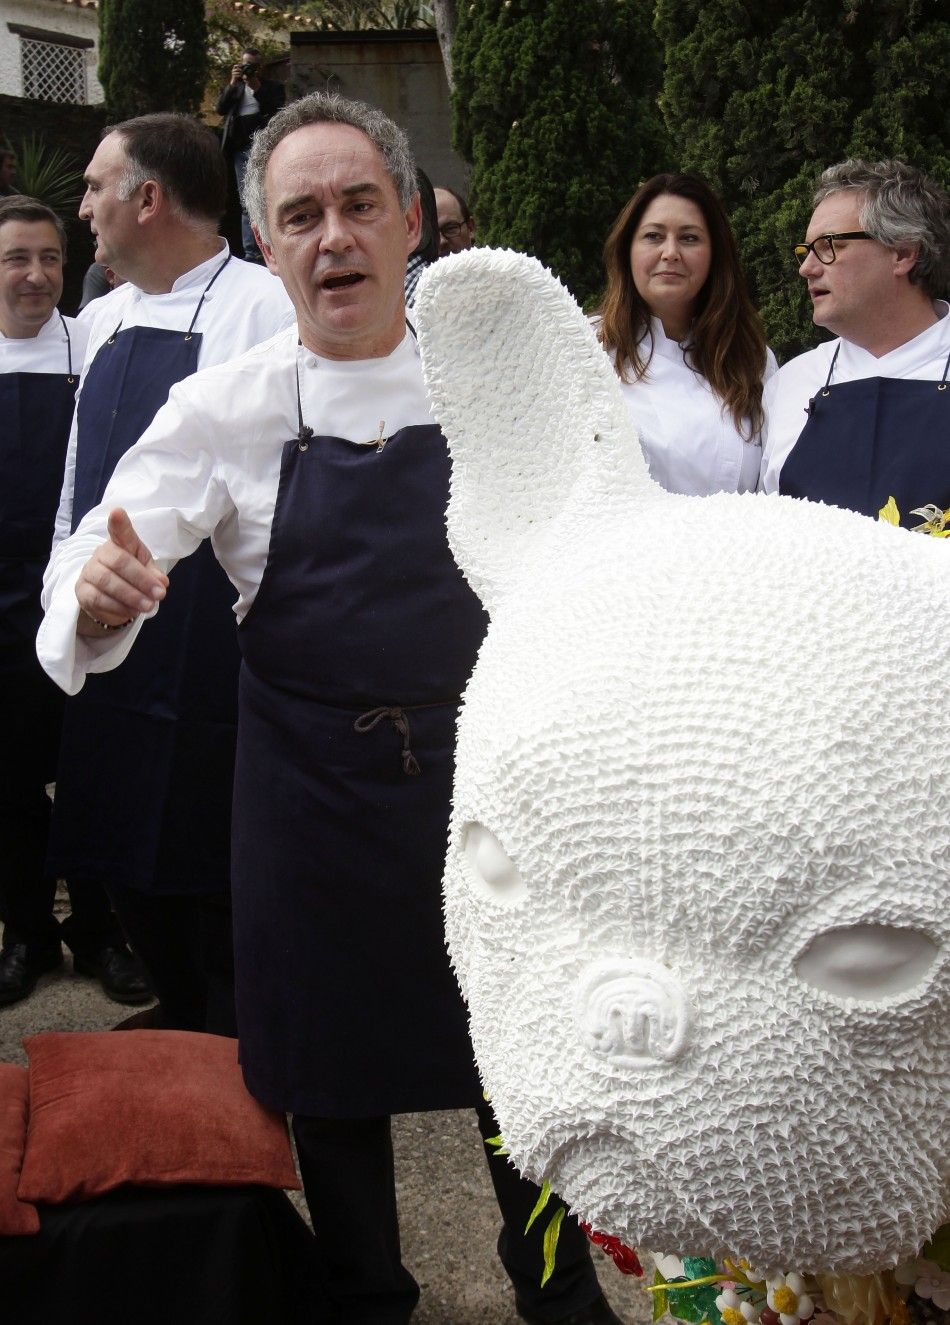 Ferran Adria, chef and co-owner of El Bulli restaurant, gestures during a news conference outside the restaurant in Cala Montjoi, near Roses.